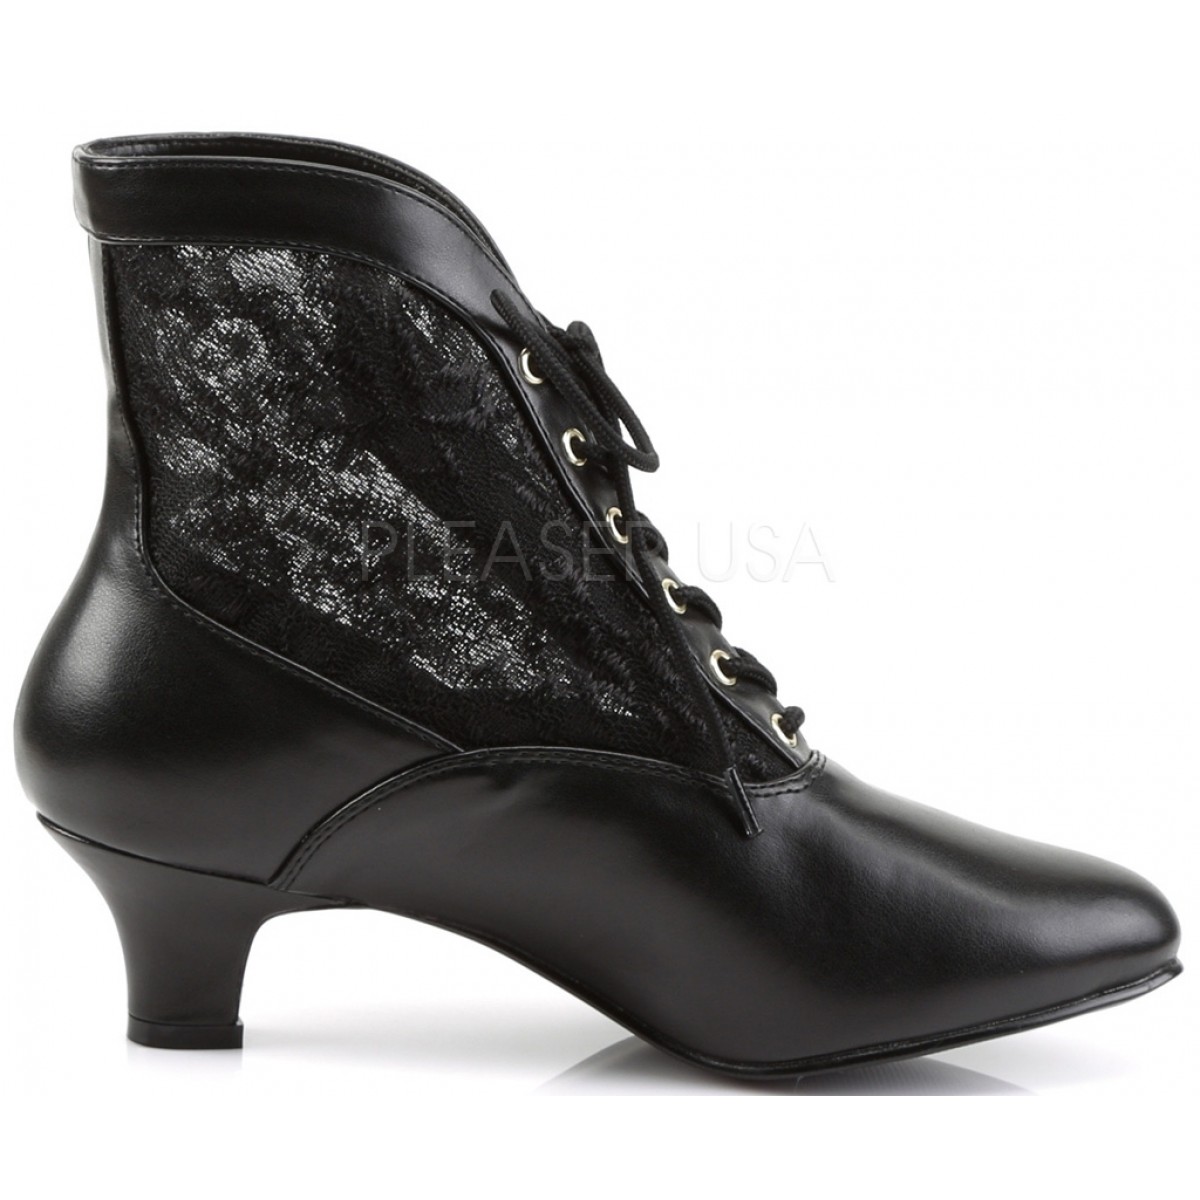 Victorian Lace Ankle Black Boots - Steampunk Costume Ankle Boots